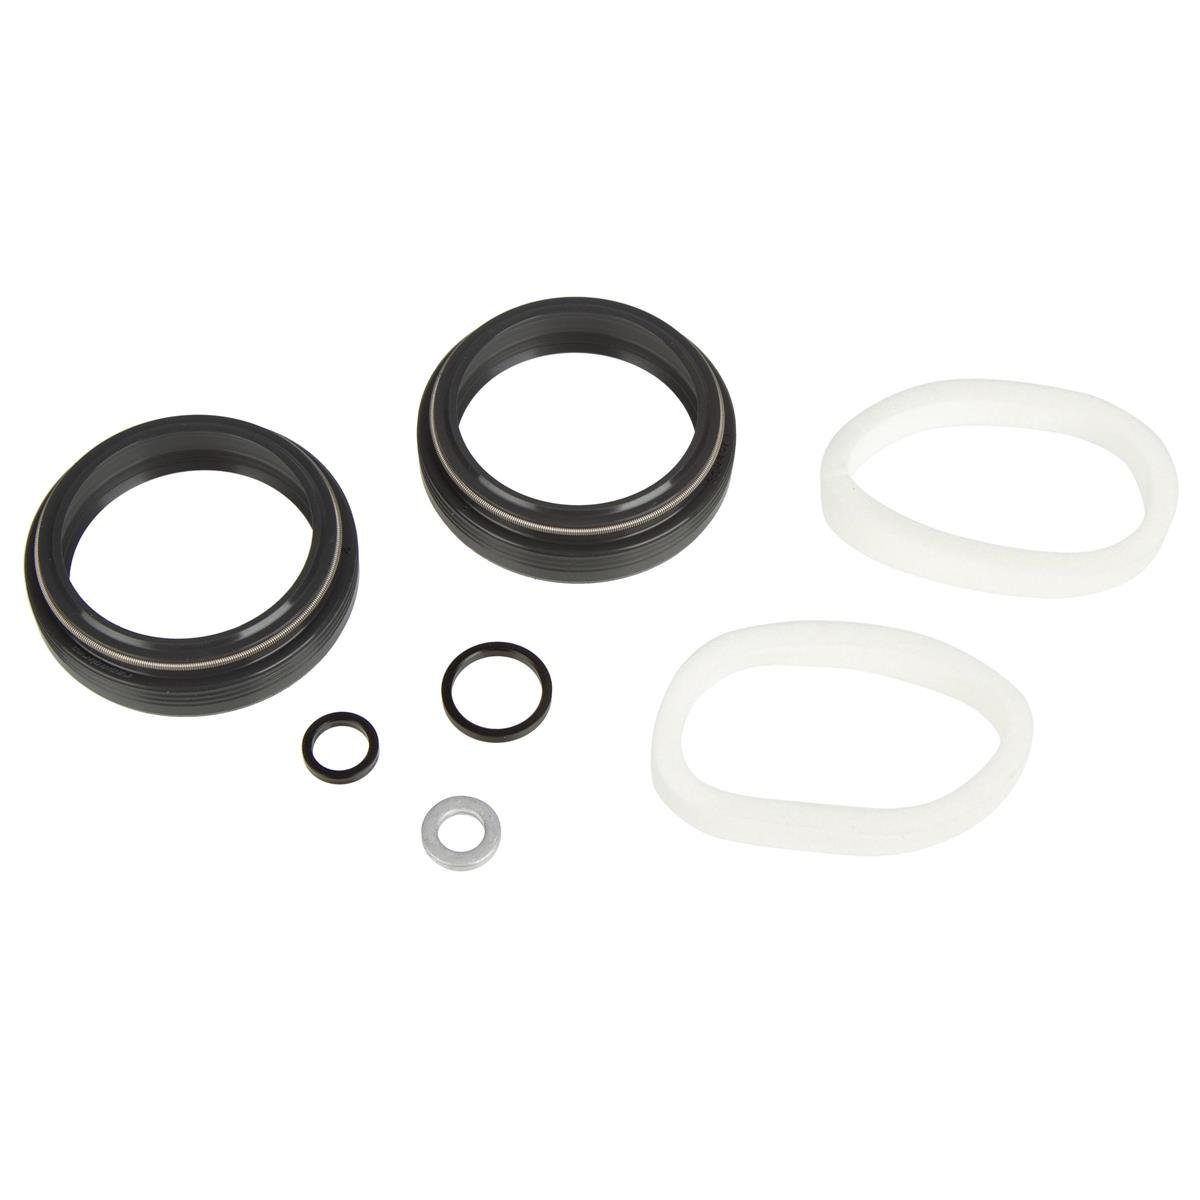 Dust Wiper Low Friction 35A Racingbros Kit Parapolvere 35mm NO FLANGE